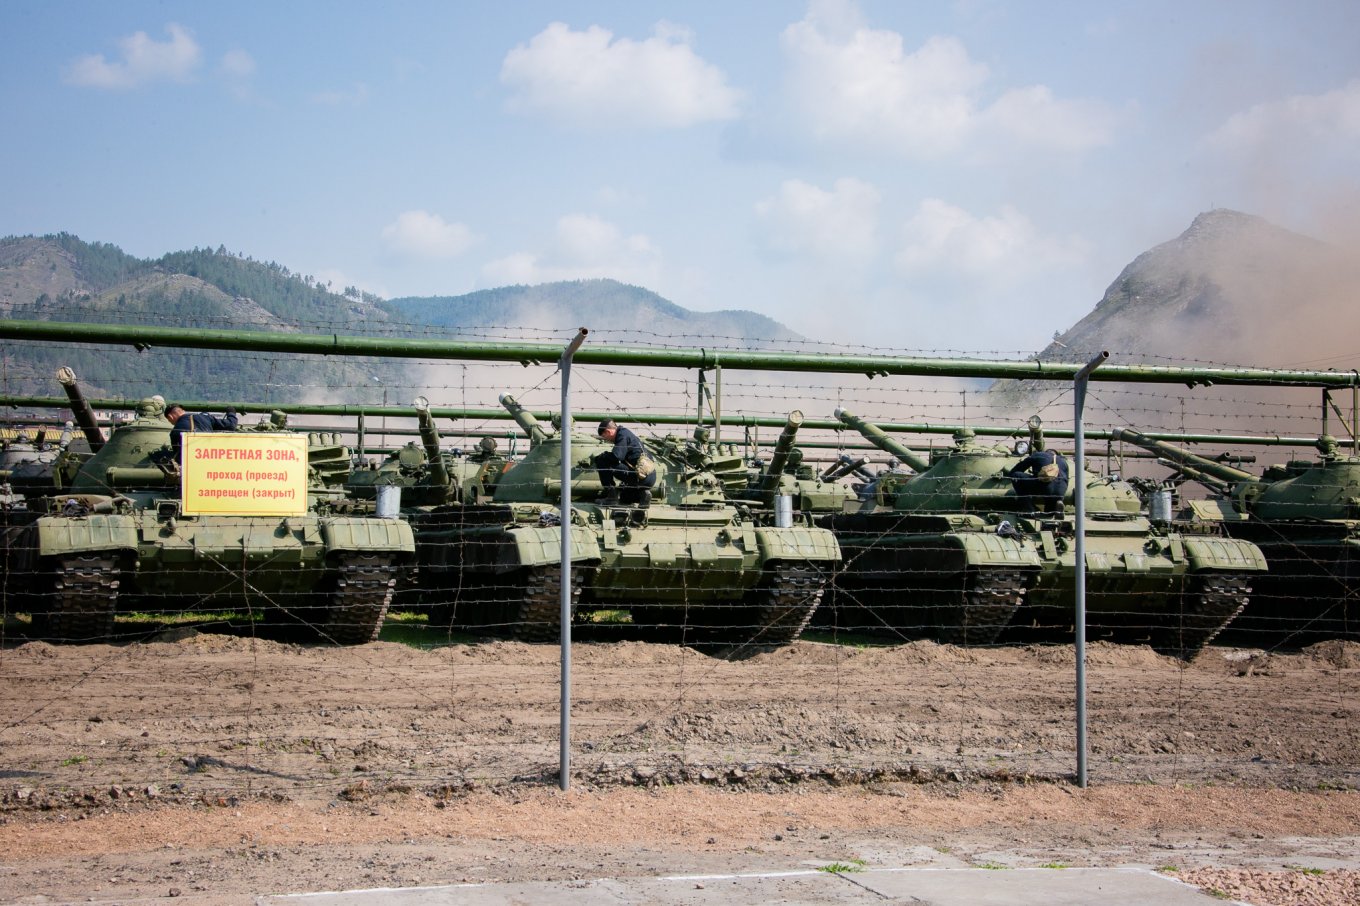 T-62 tanks on a reserve stock military base / Russia has Lost 30% of its Modern Tanks in Ukraine